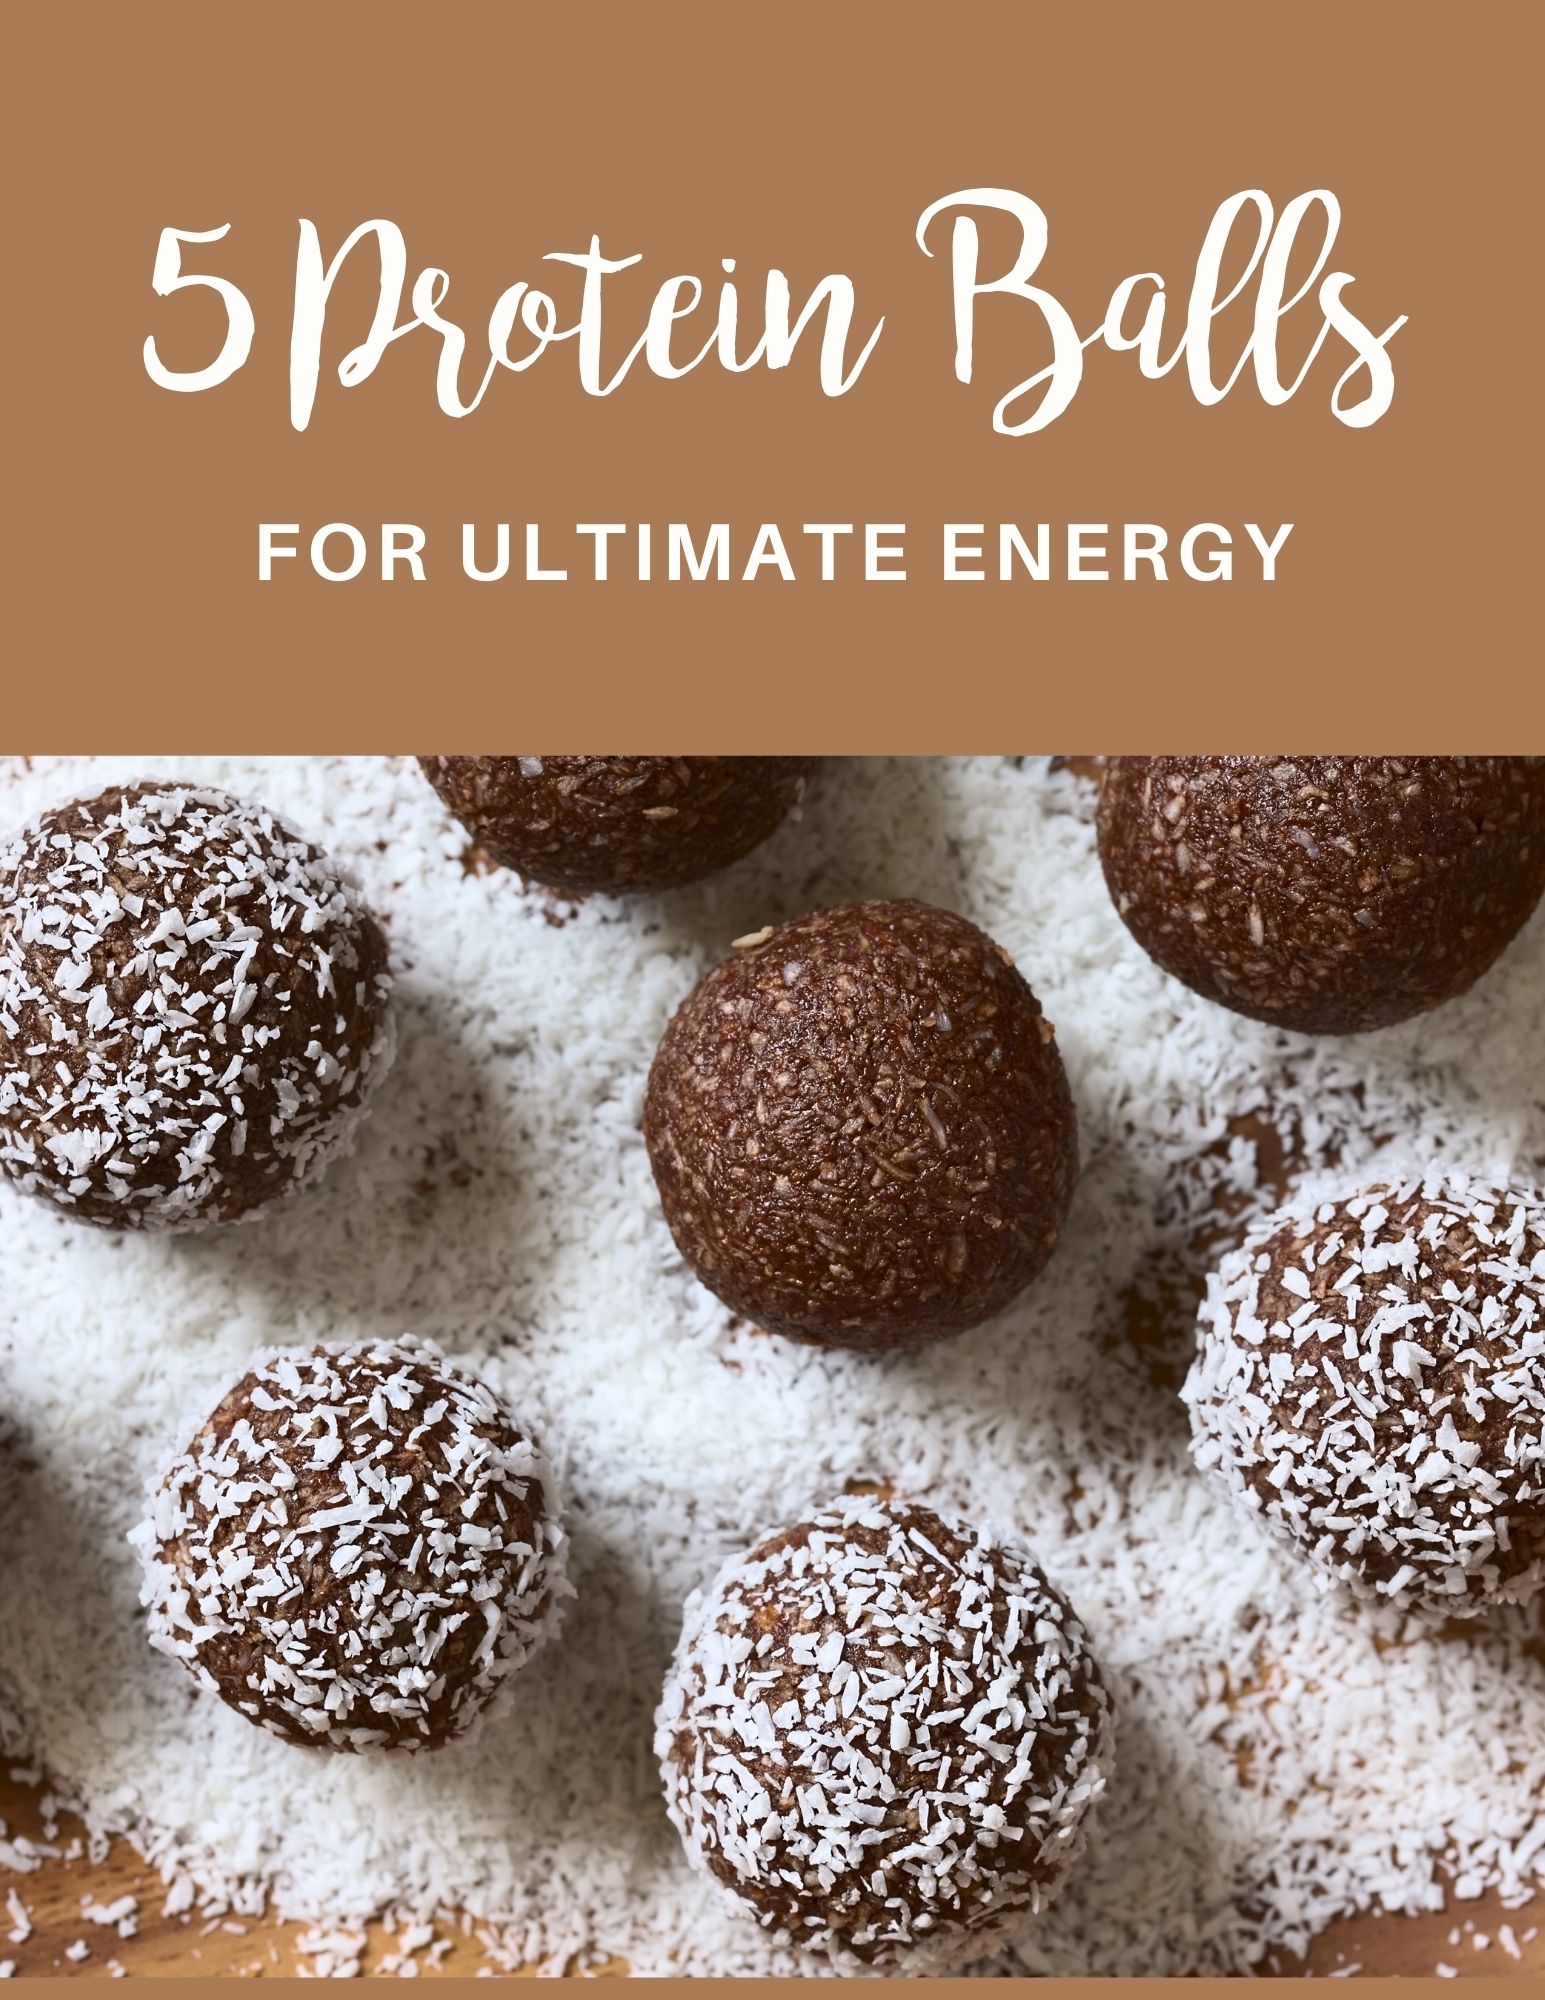 3D image of a book titled: 5 Protein Balls for Ultimate Energy